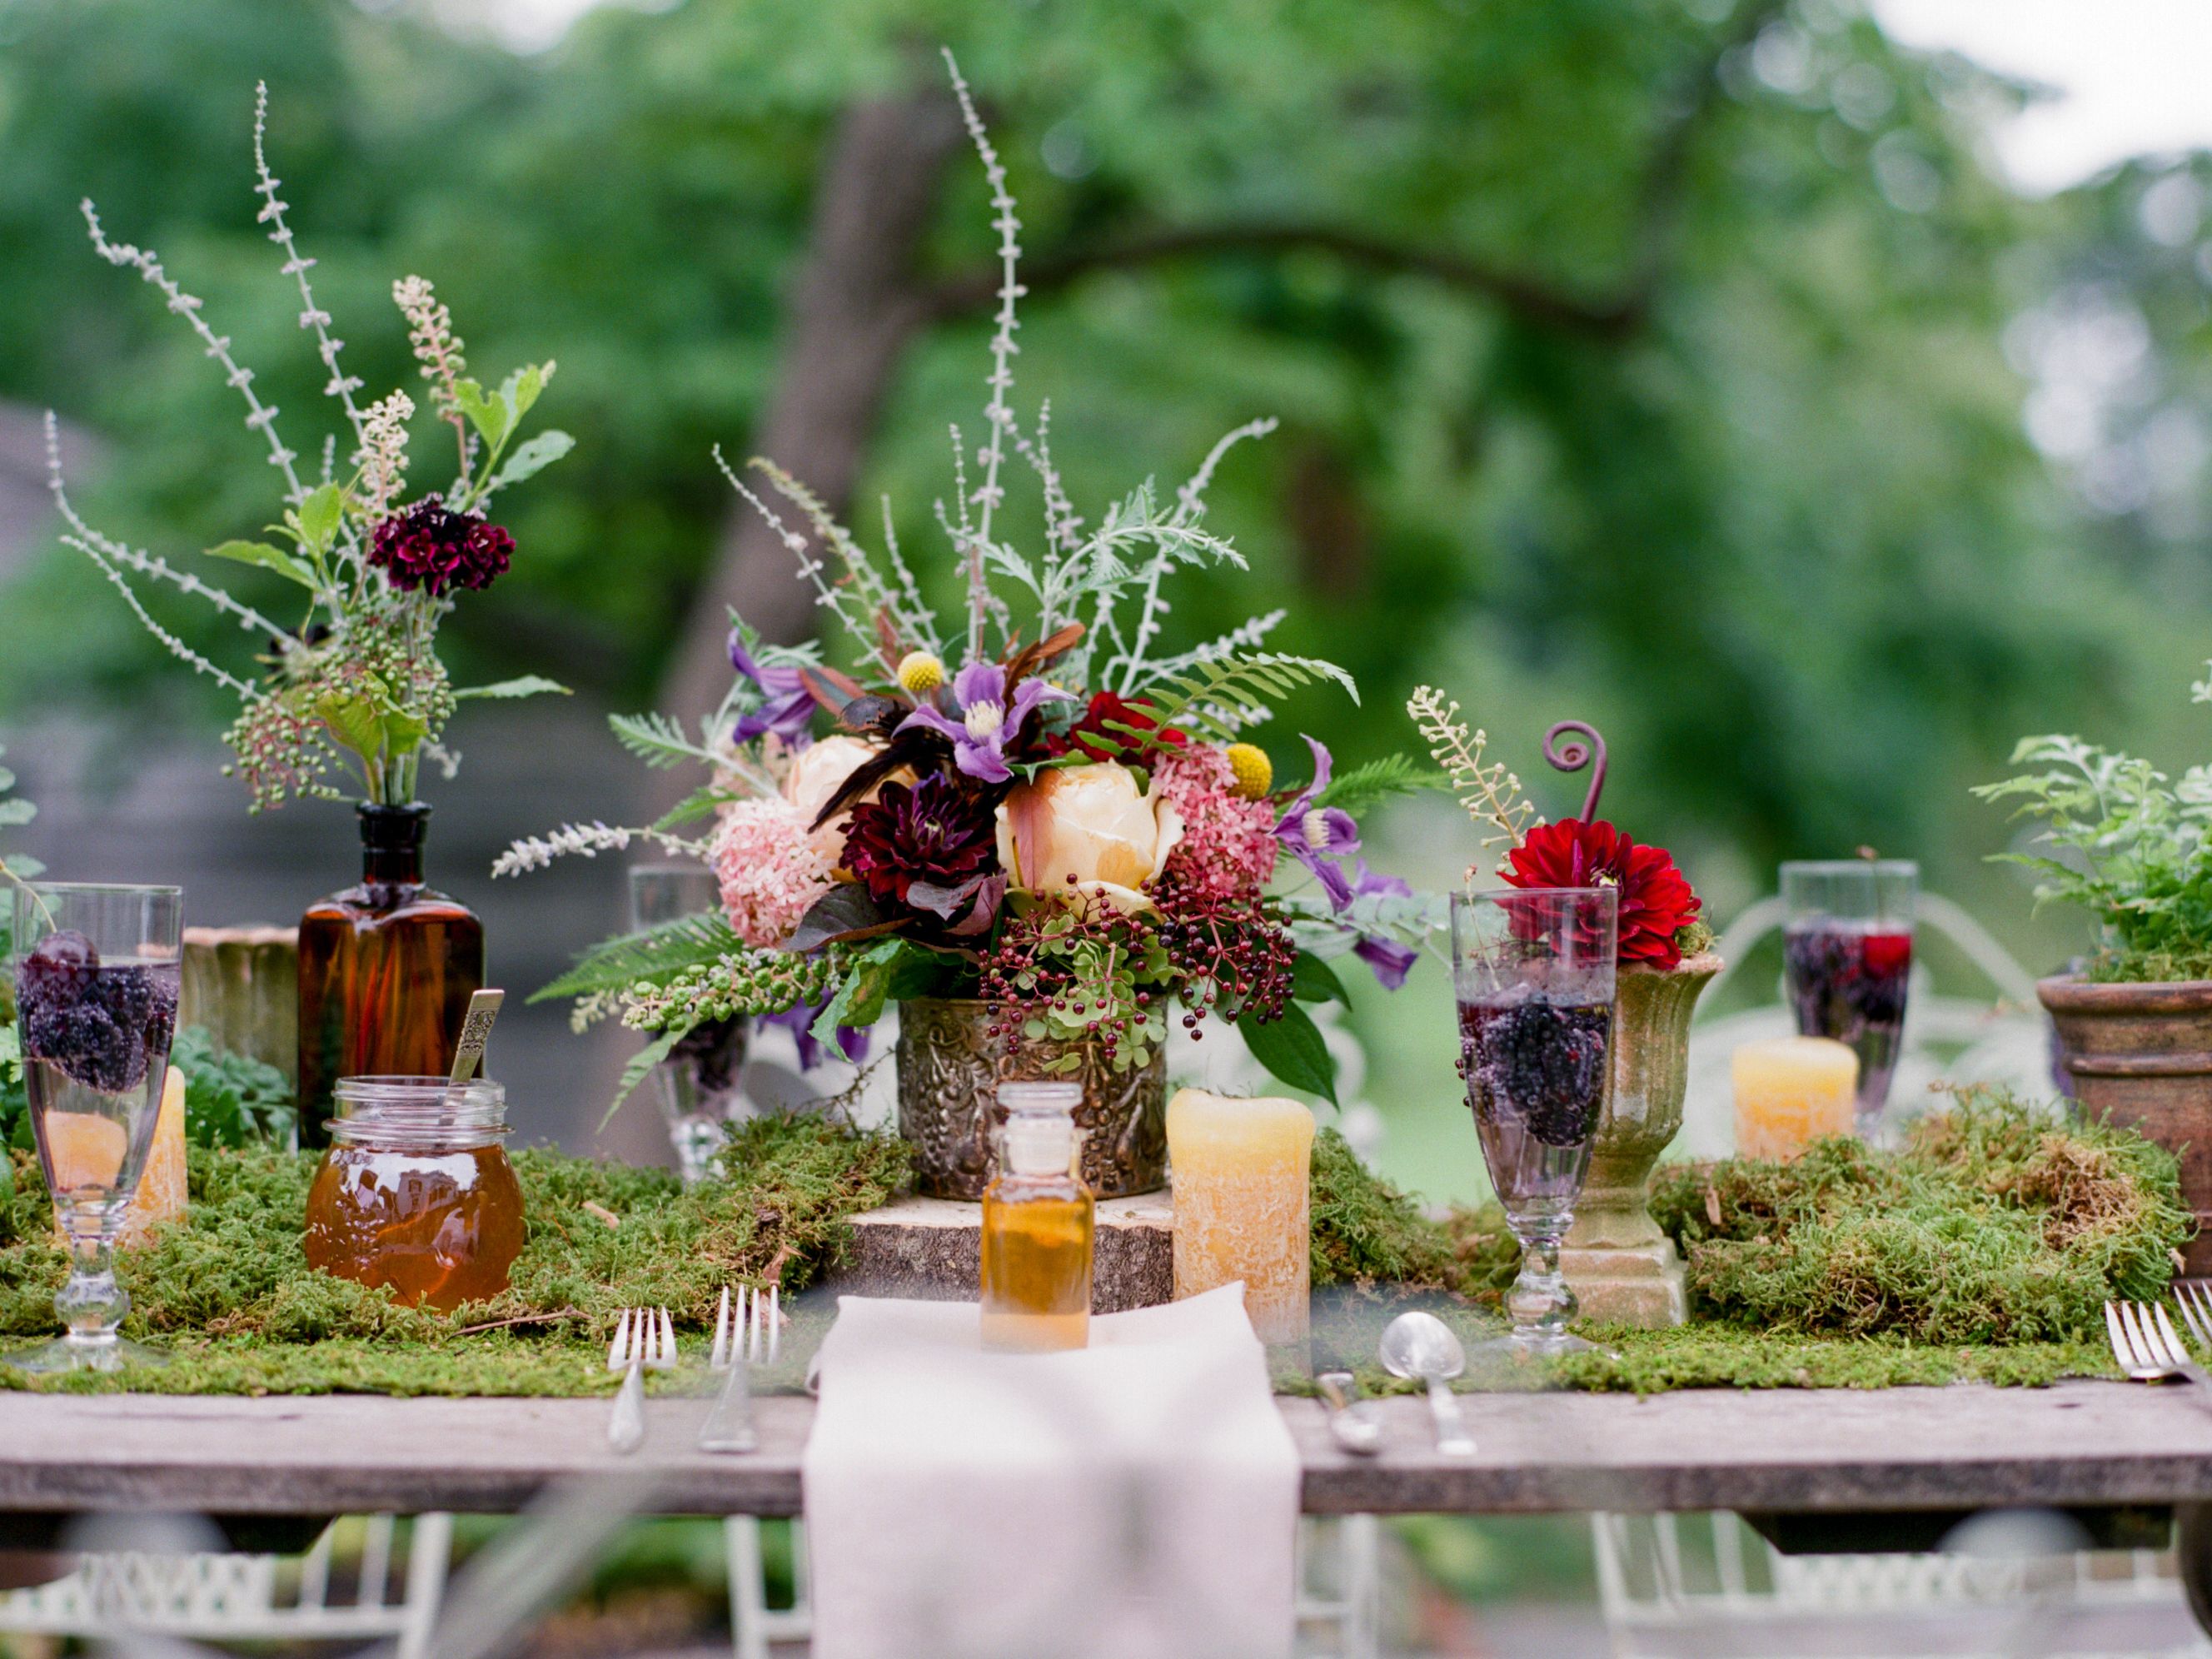 How To Incorporate Potted Plants Into Your Wedding?